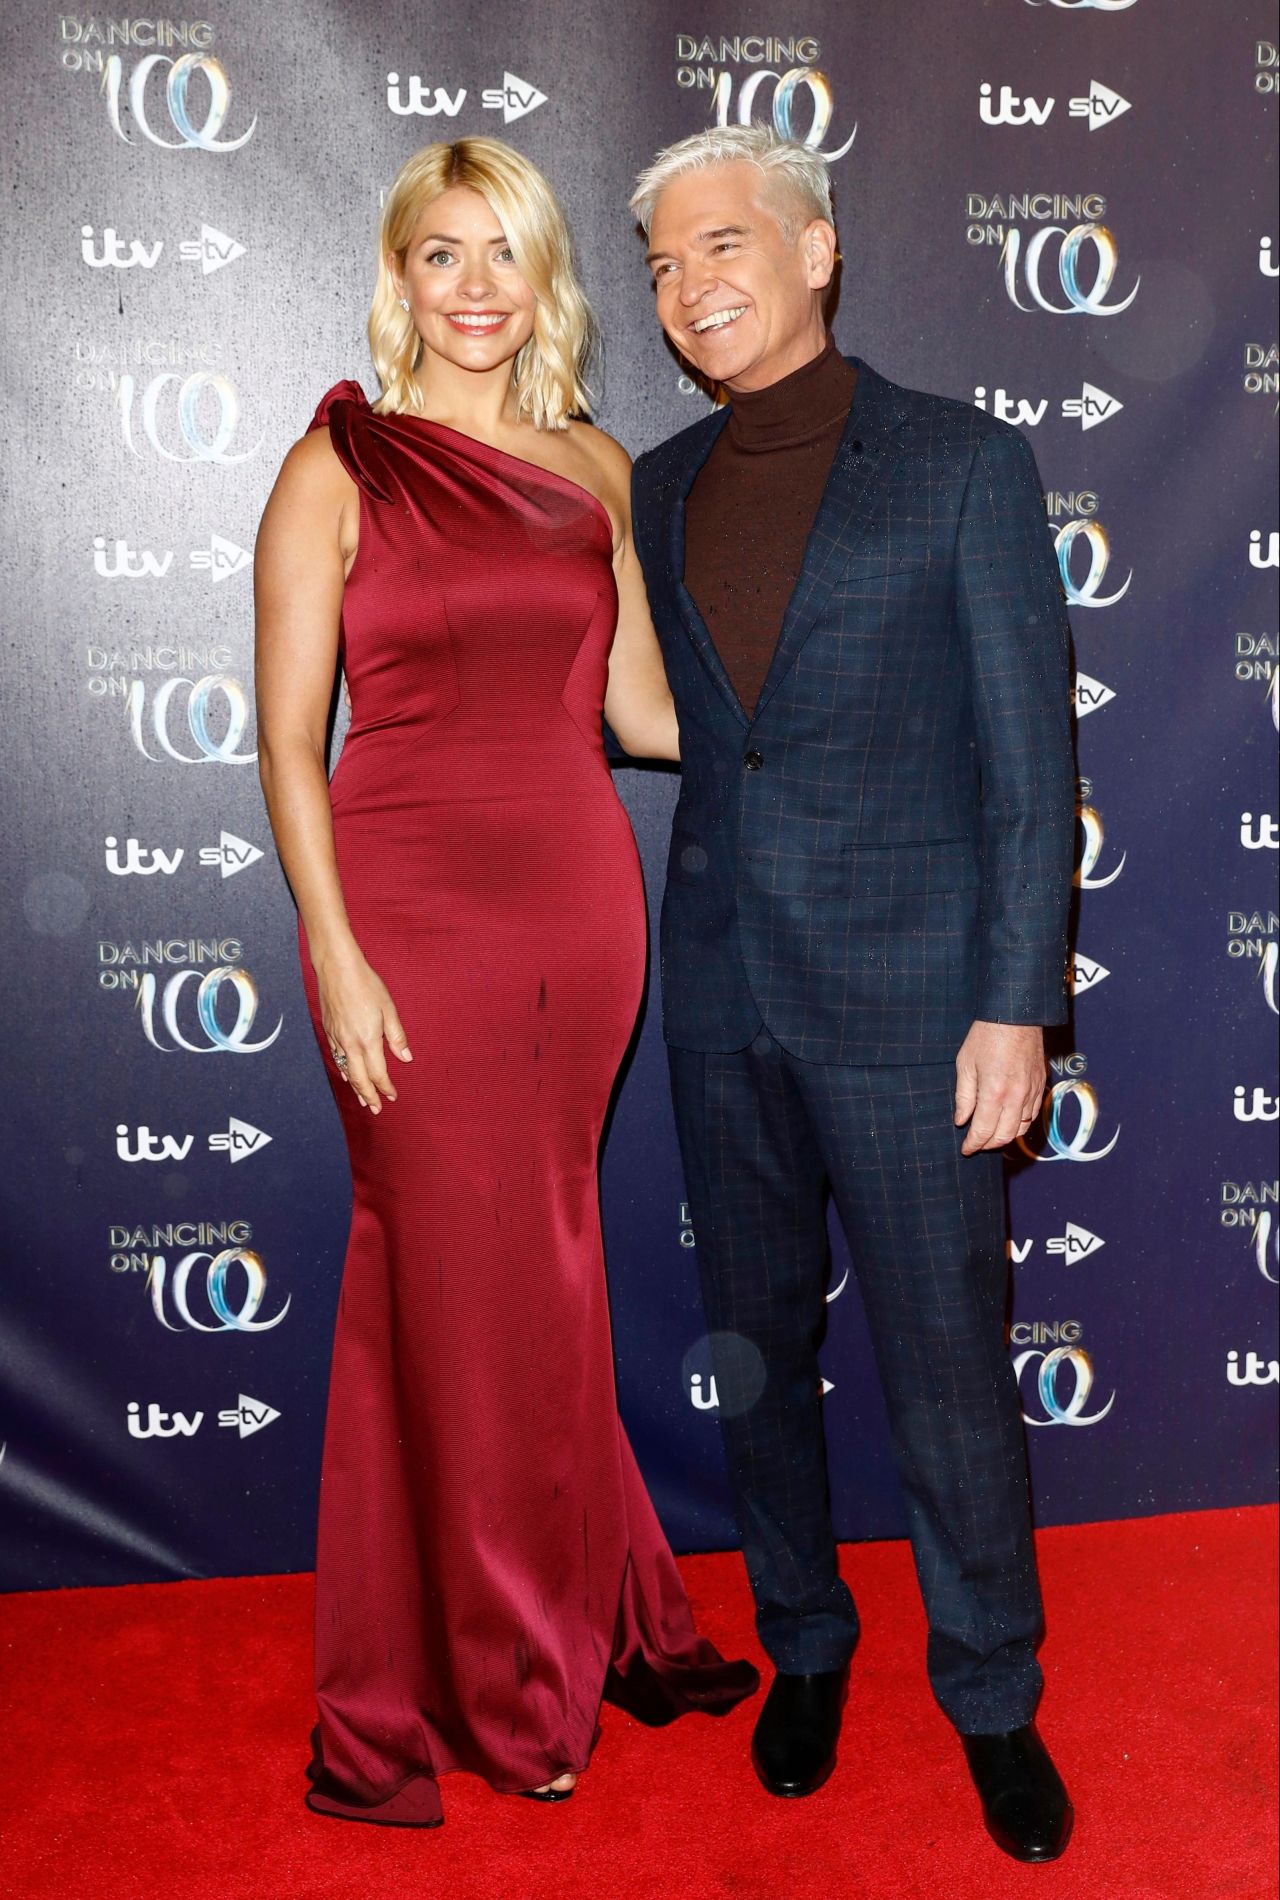 Holly Willoughby - Dancing On Ice Launch Event in London 12/18/20181280 x 1900